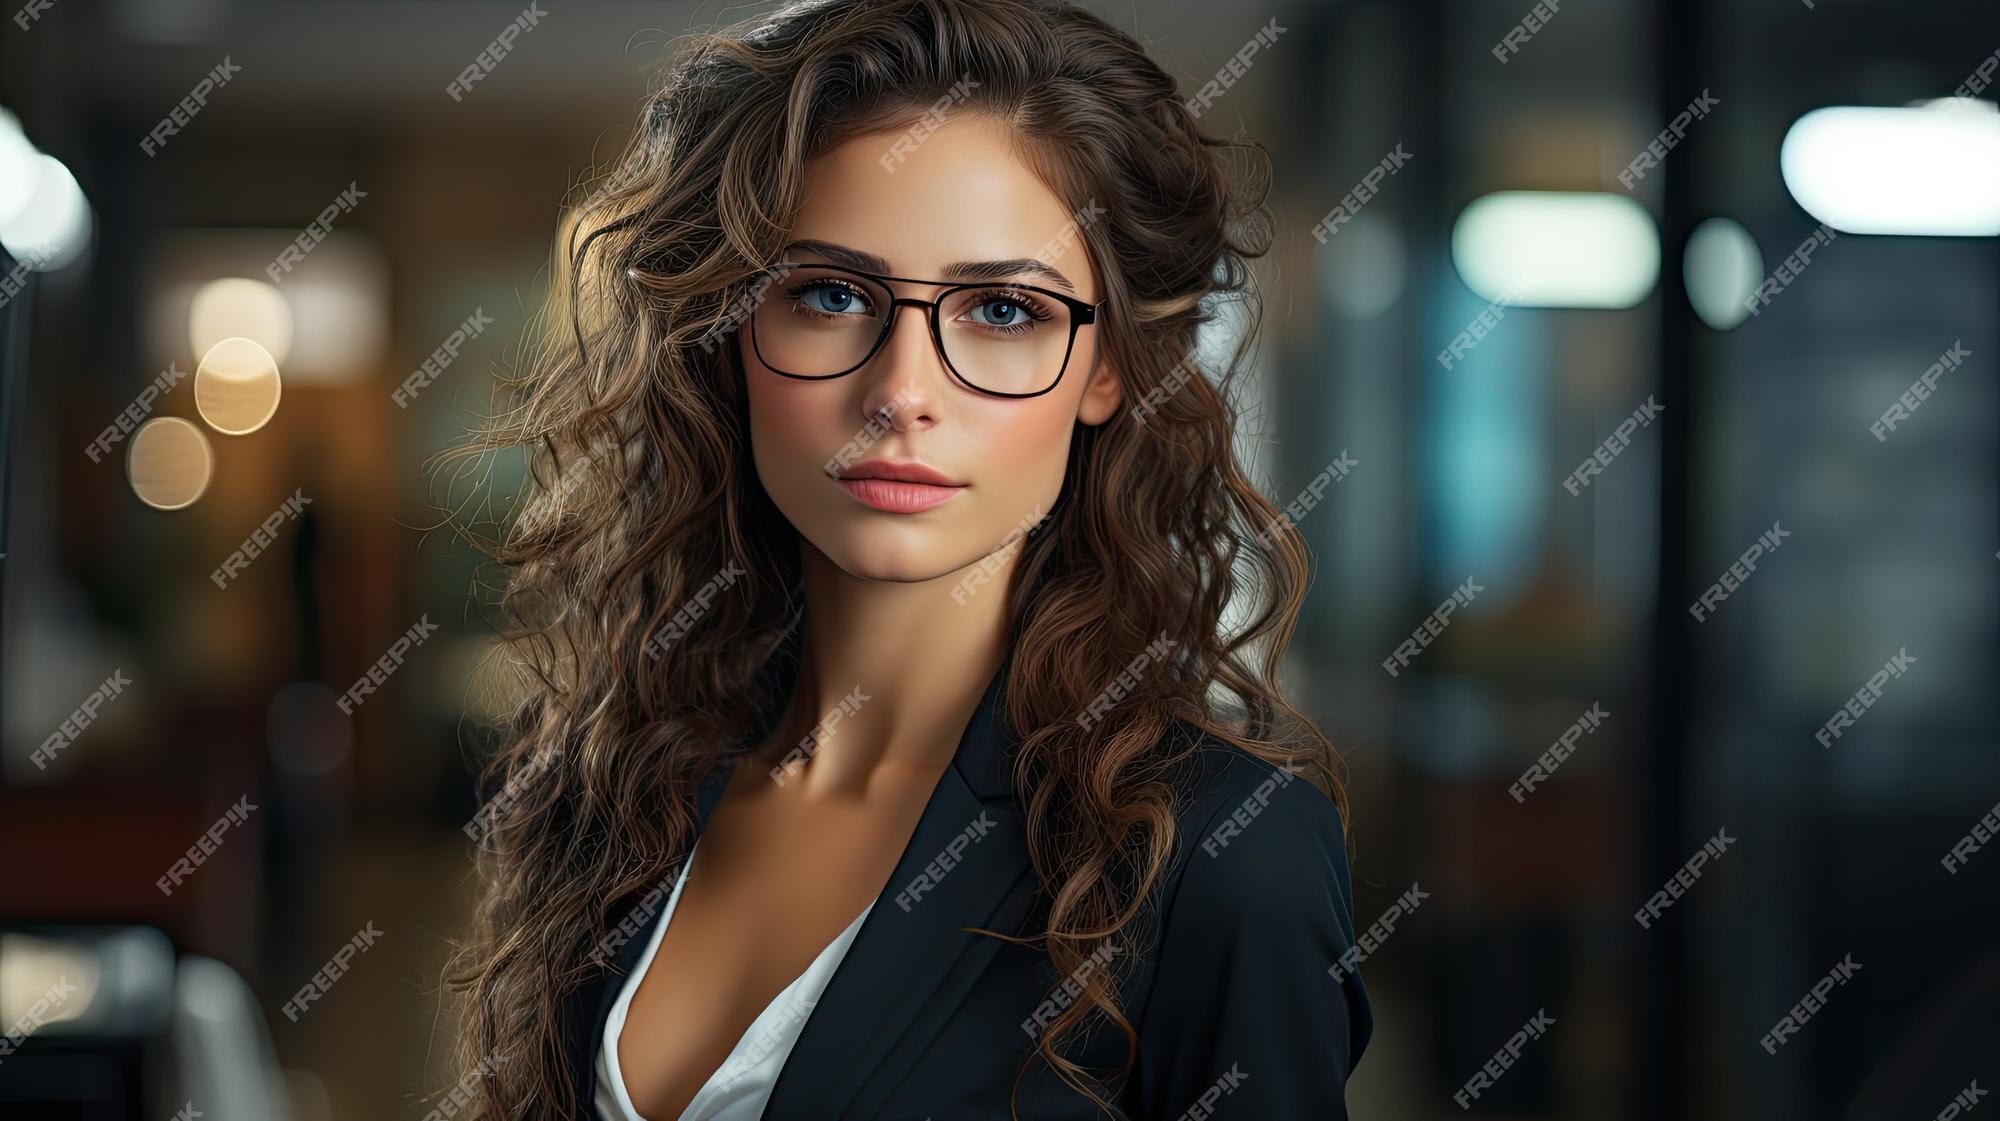 Premium Ai Image A Woman With Long Curly Hair Wearing Glasses